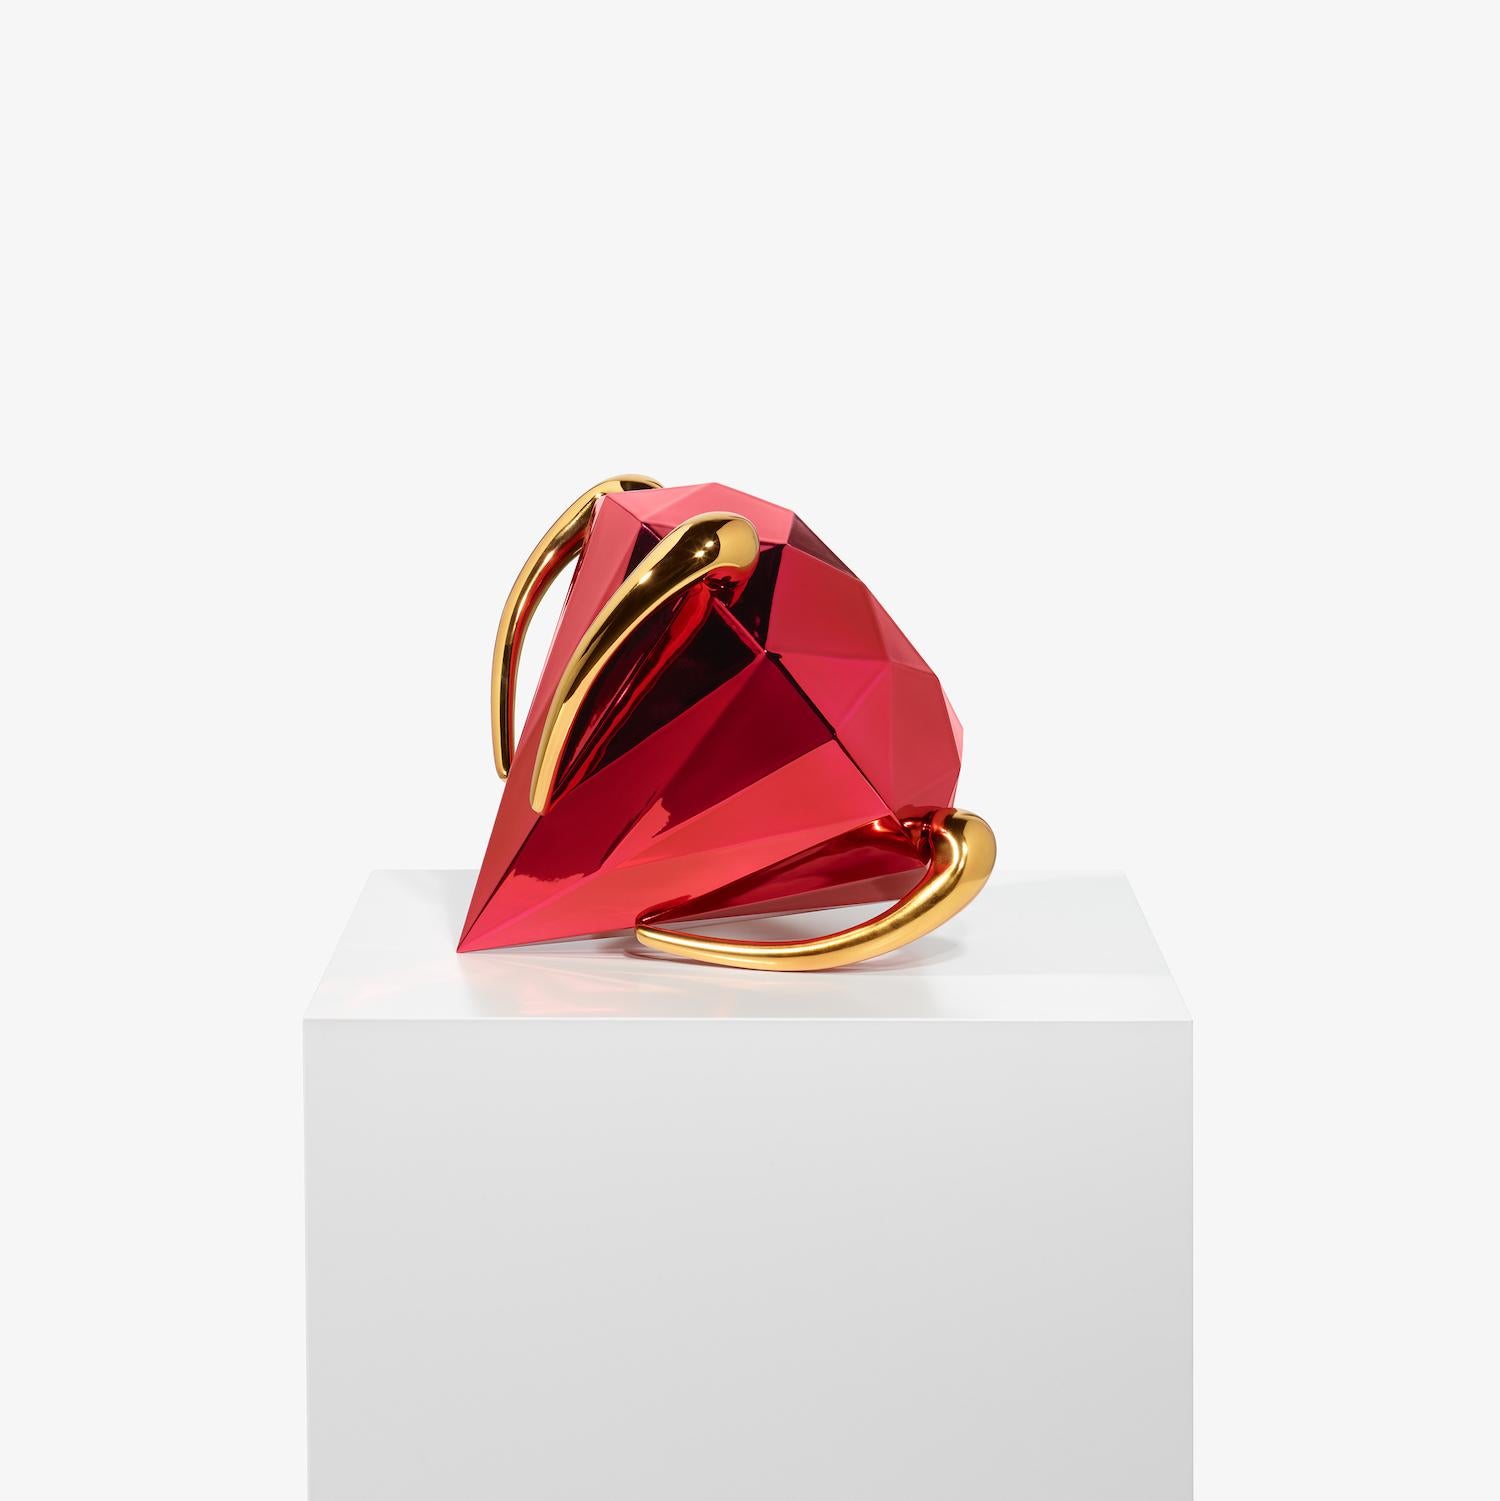 Red Diamond Sculpture by Jeff Koons, Porcelaine, Objects for Objects, Contemporary Art en vente 1